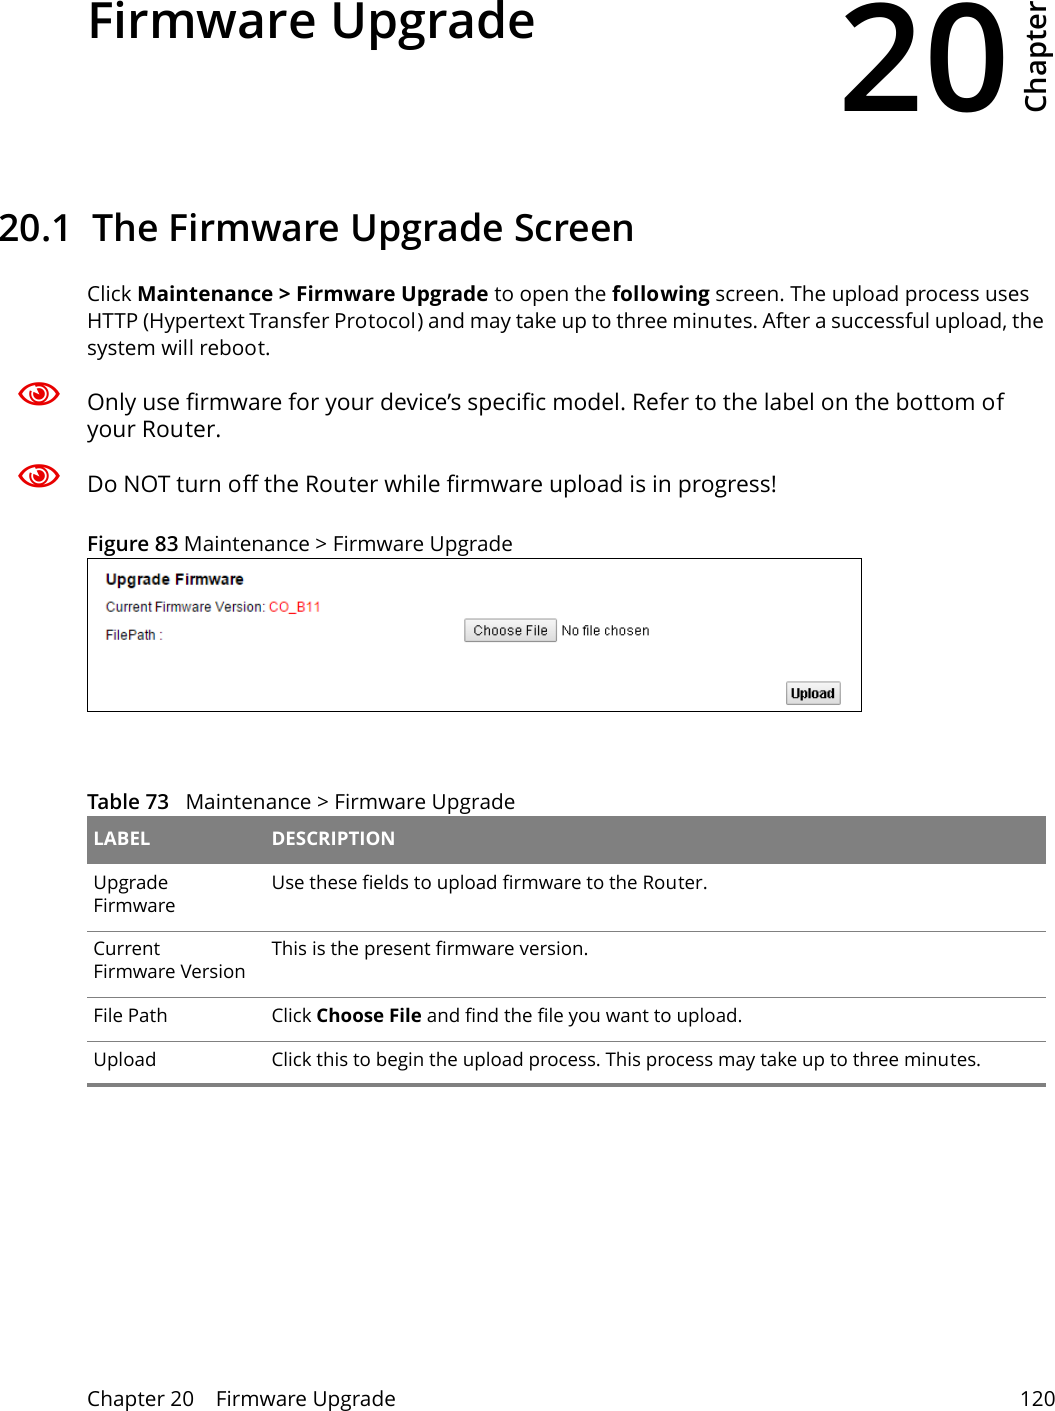 20Chapter Chapter 20    Firmware Upgrade 120CHAPTER 20 Chapter 20 Firmware Upgrade20.1  The Firmware Upgrade ScreenClick Maintenance &gt; Firmware Upgrade to open the following screen. The upload process uses HTTP (Hypertext Transfer Protocol) and may take up to three minutes. After a successful upload, the system will reboot. Only use firmware for your device’s specific model. Refer to the label on the bottom of your Router.Do NOT turn off the Router while firmware upload is in progress!Figure 83 Maintenance &gt; Firmware Upgrade Table 73   Maintenance &gt; Firmware Upgrade LABEL DESCRIPTIONUpgrade FirmwareUse these fields to upload firmware to the Router.Current Firmware VersionThis is the present firmware version. File Path Click Choose File and find the file you want to upload.Upload  Click this to begin the upload process. This process may take up to three minutes.